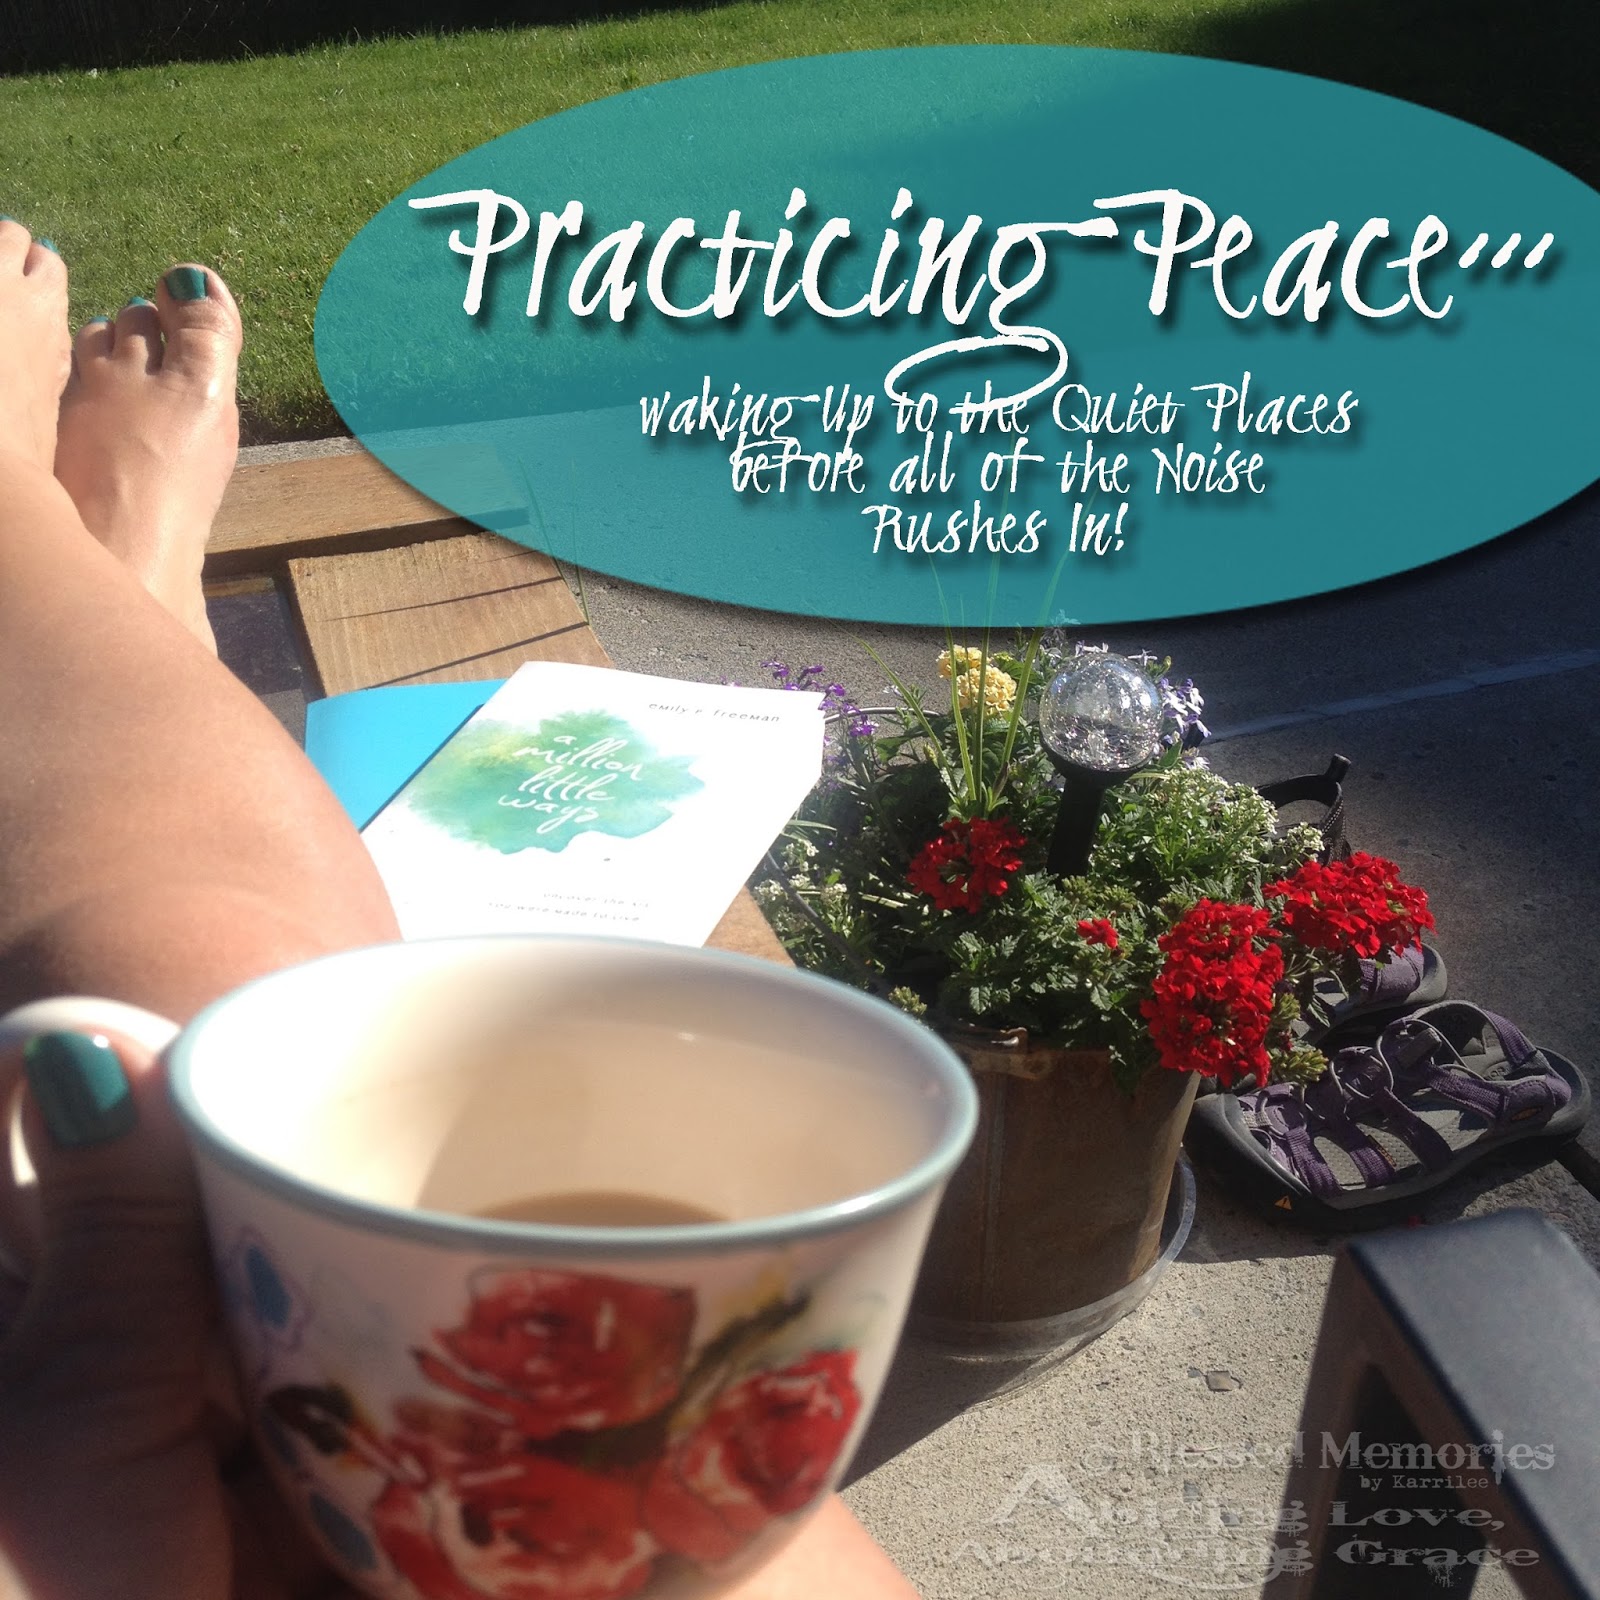 Abiding Love, Abounding Grace: Practicing Peace... Waking Up to the